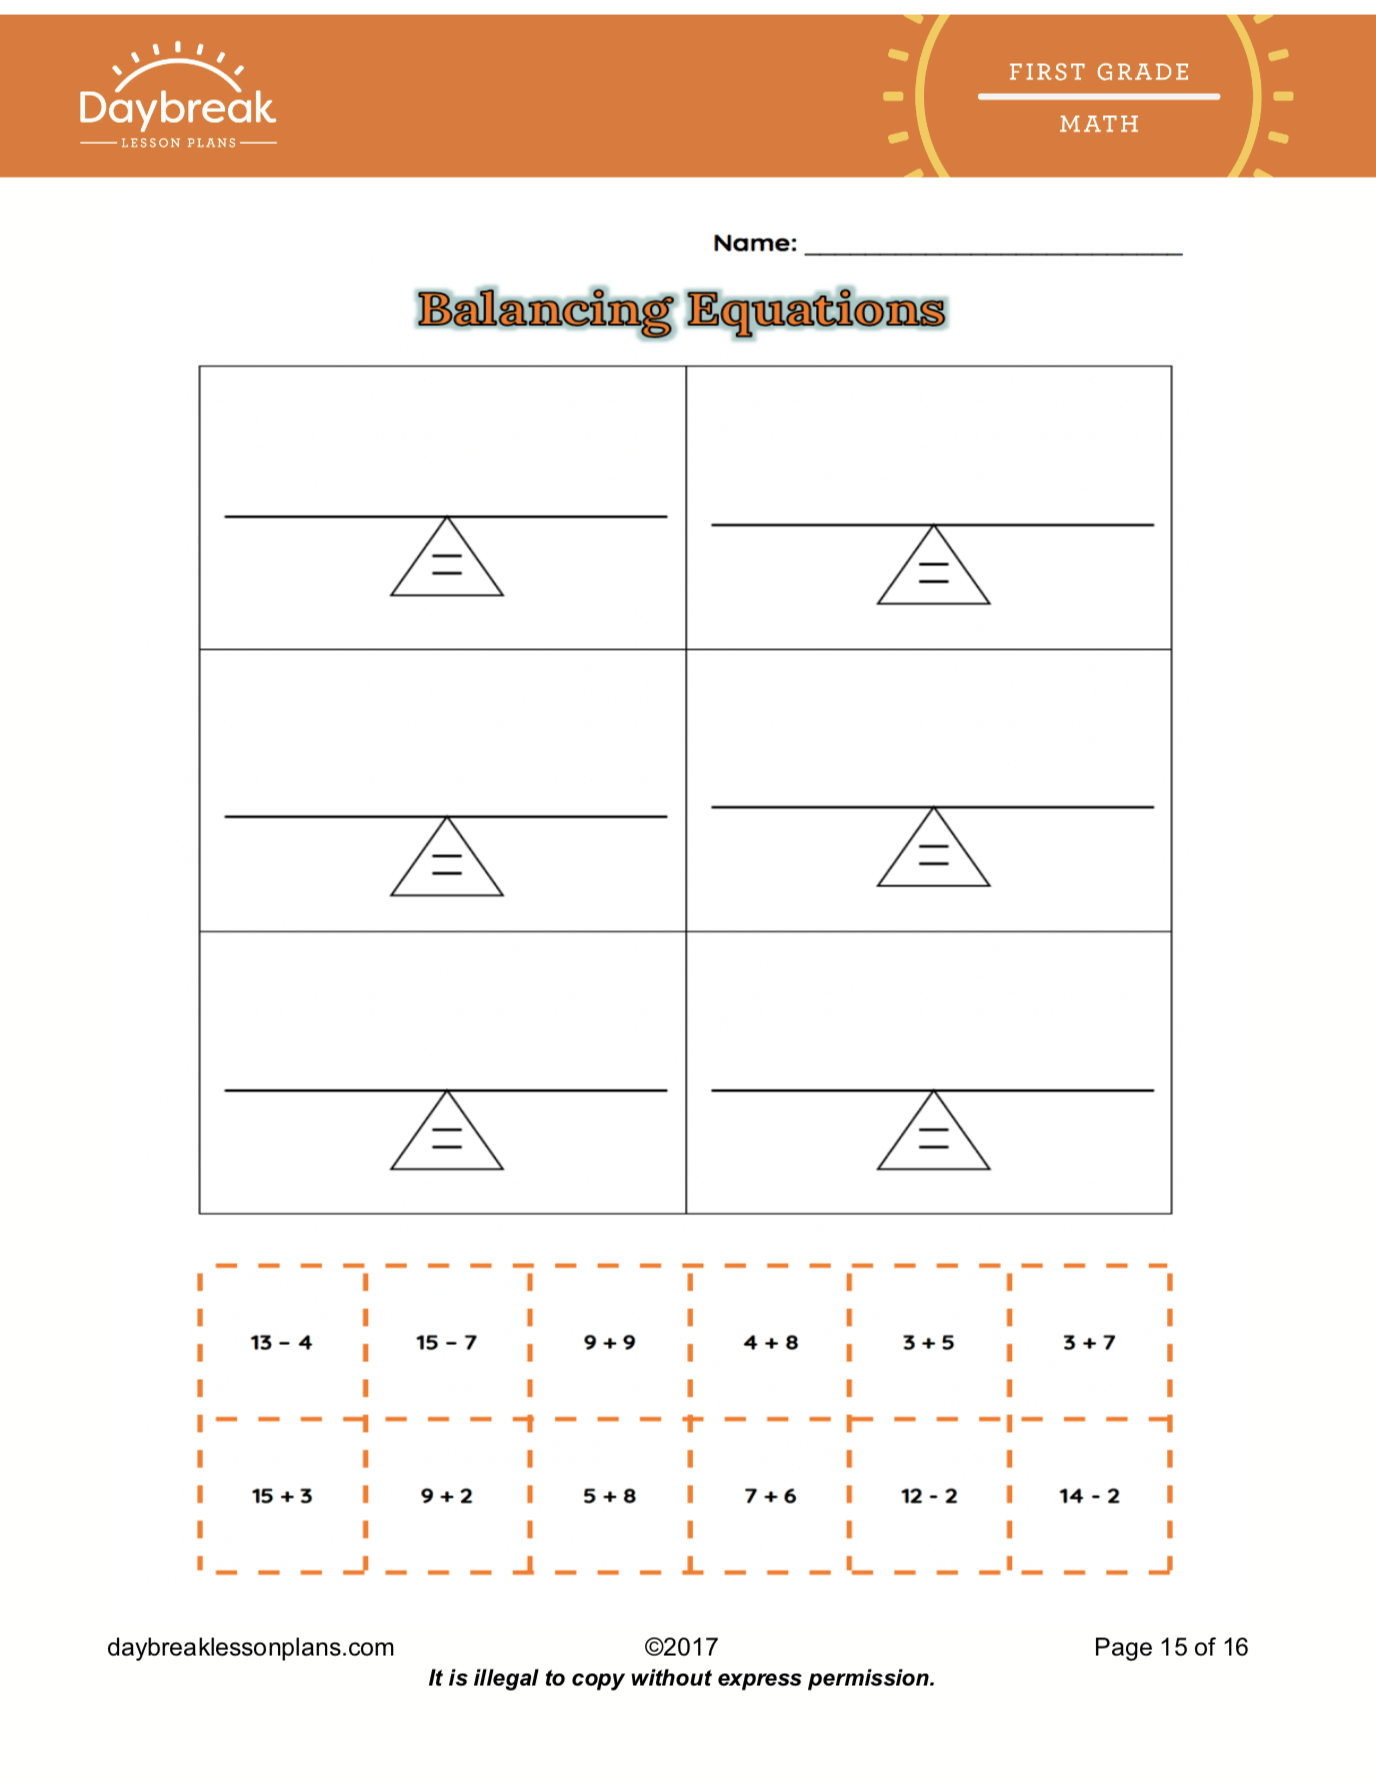 Equals Sign: Add/Subtract within 20 - Page 1 of 0 - Daybreak Lessons